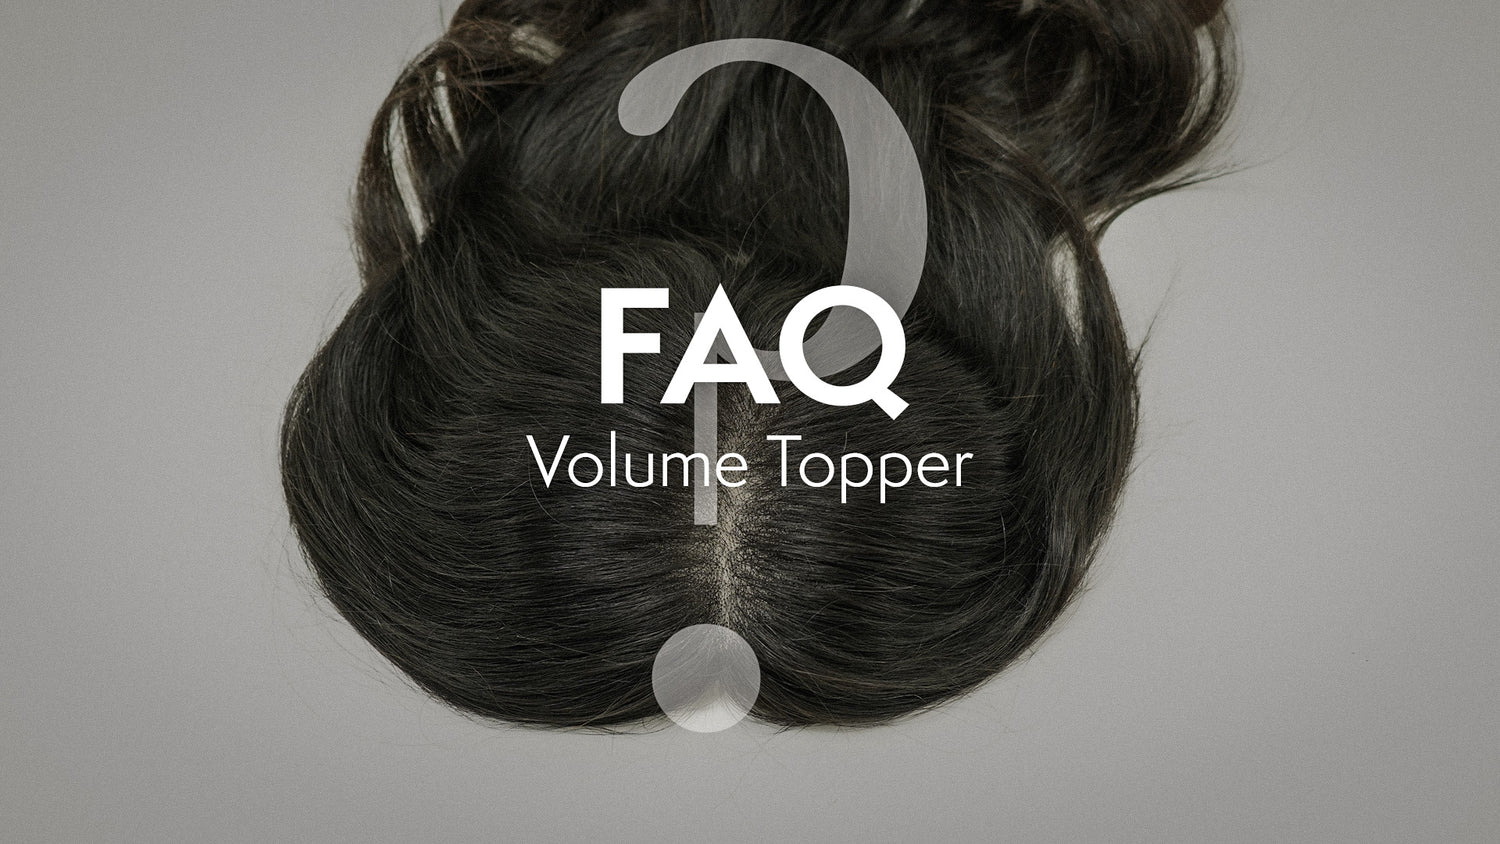 Frequently Asked Questions: Volume Topper